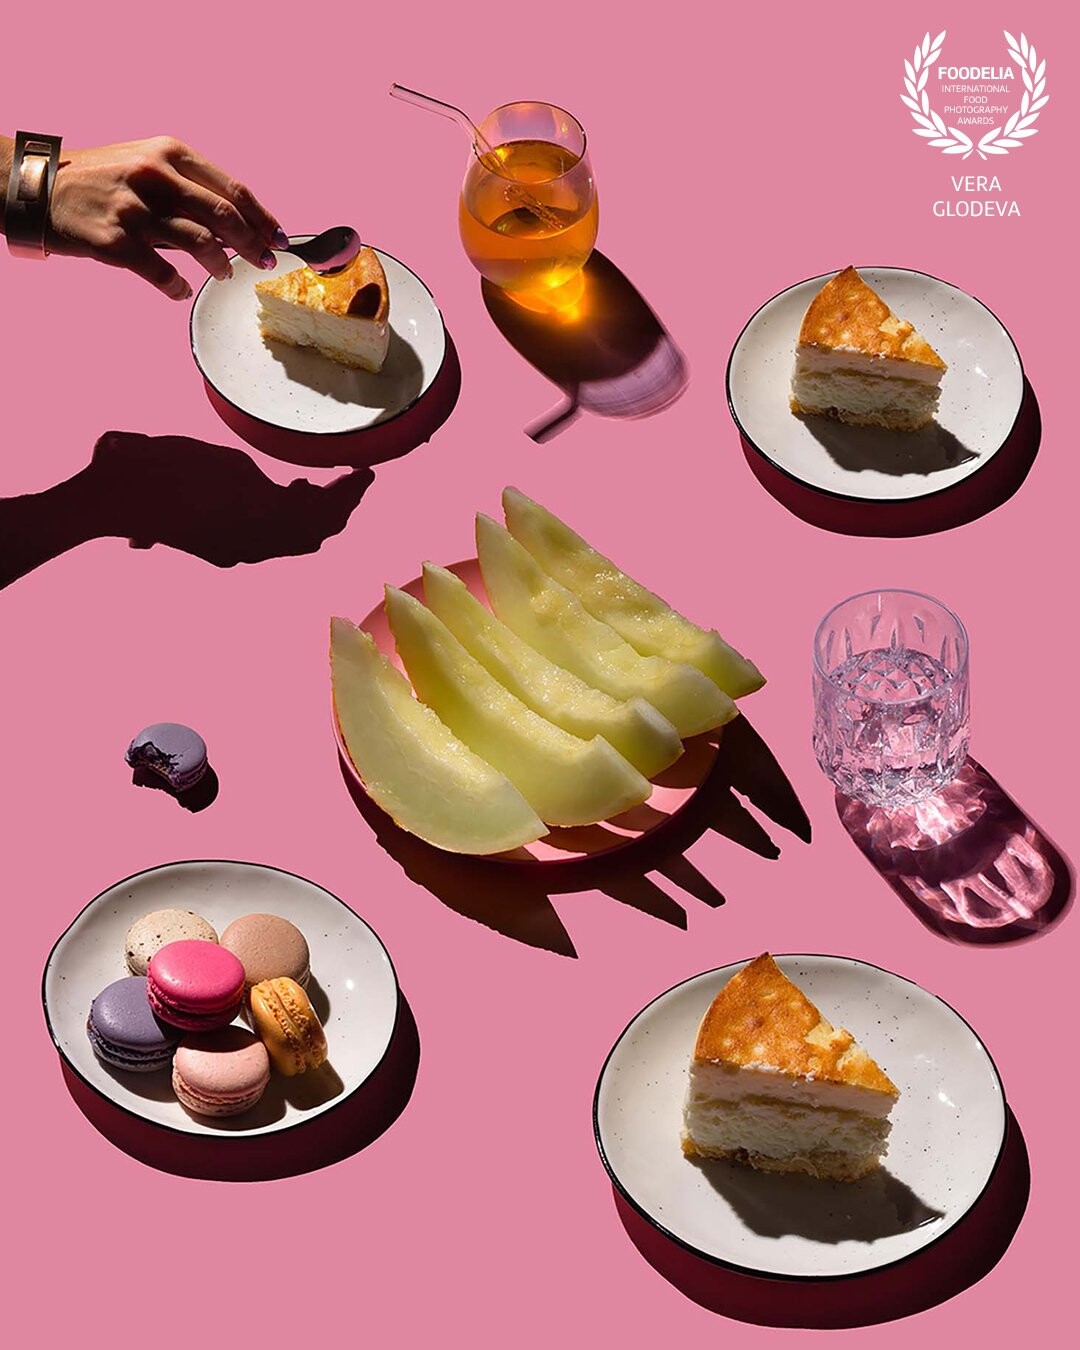 This is a story about an attractive sweet lunch that beckons us with its desserts and bright melon and inspires us with its reflections and shadows.